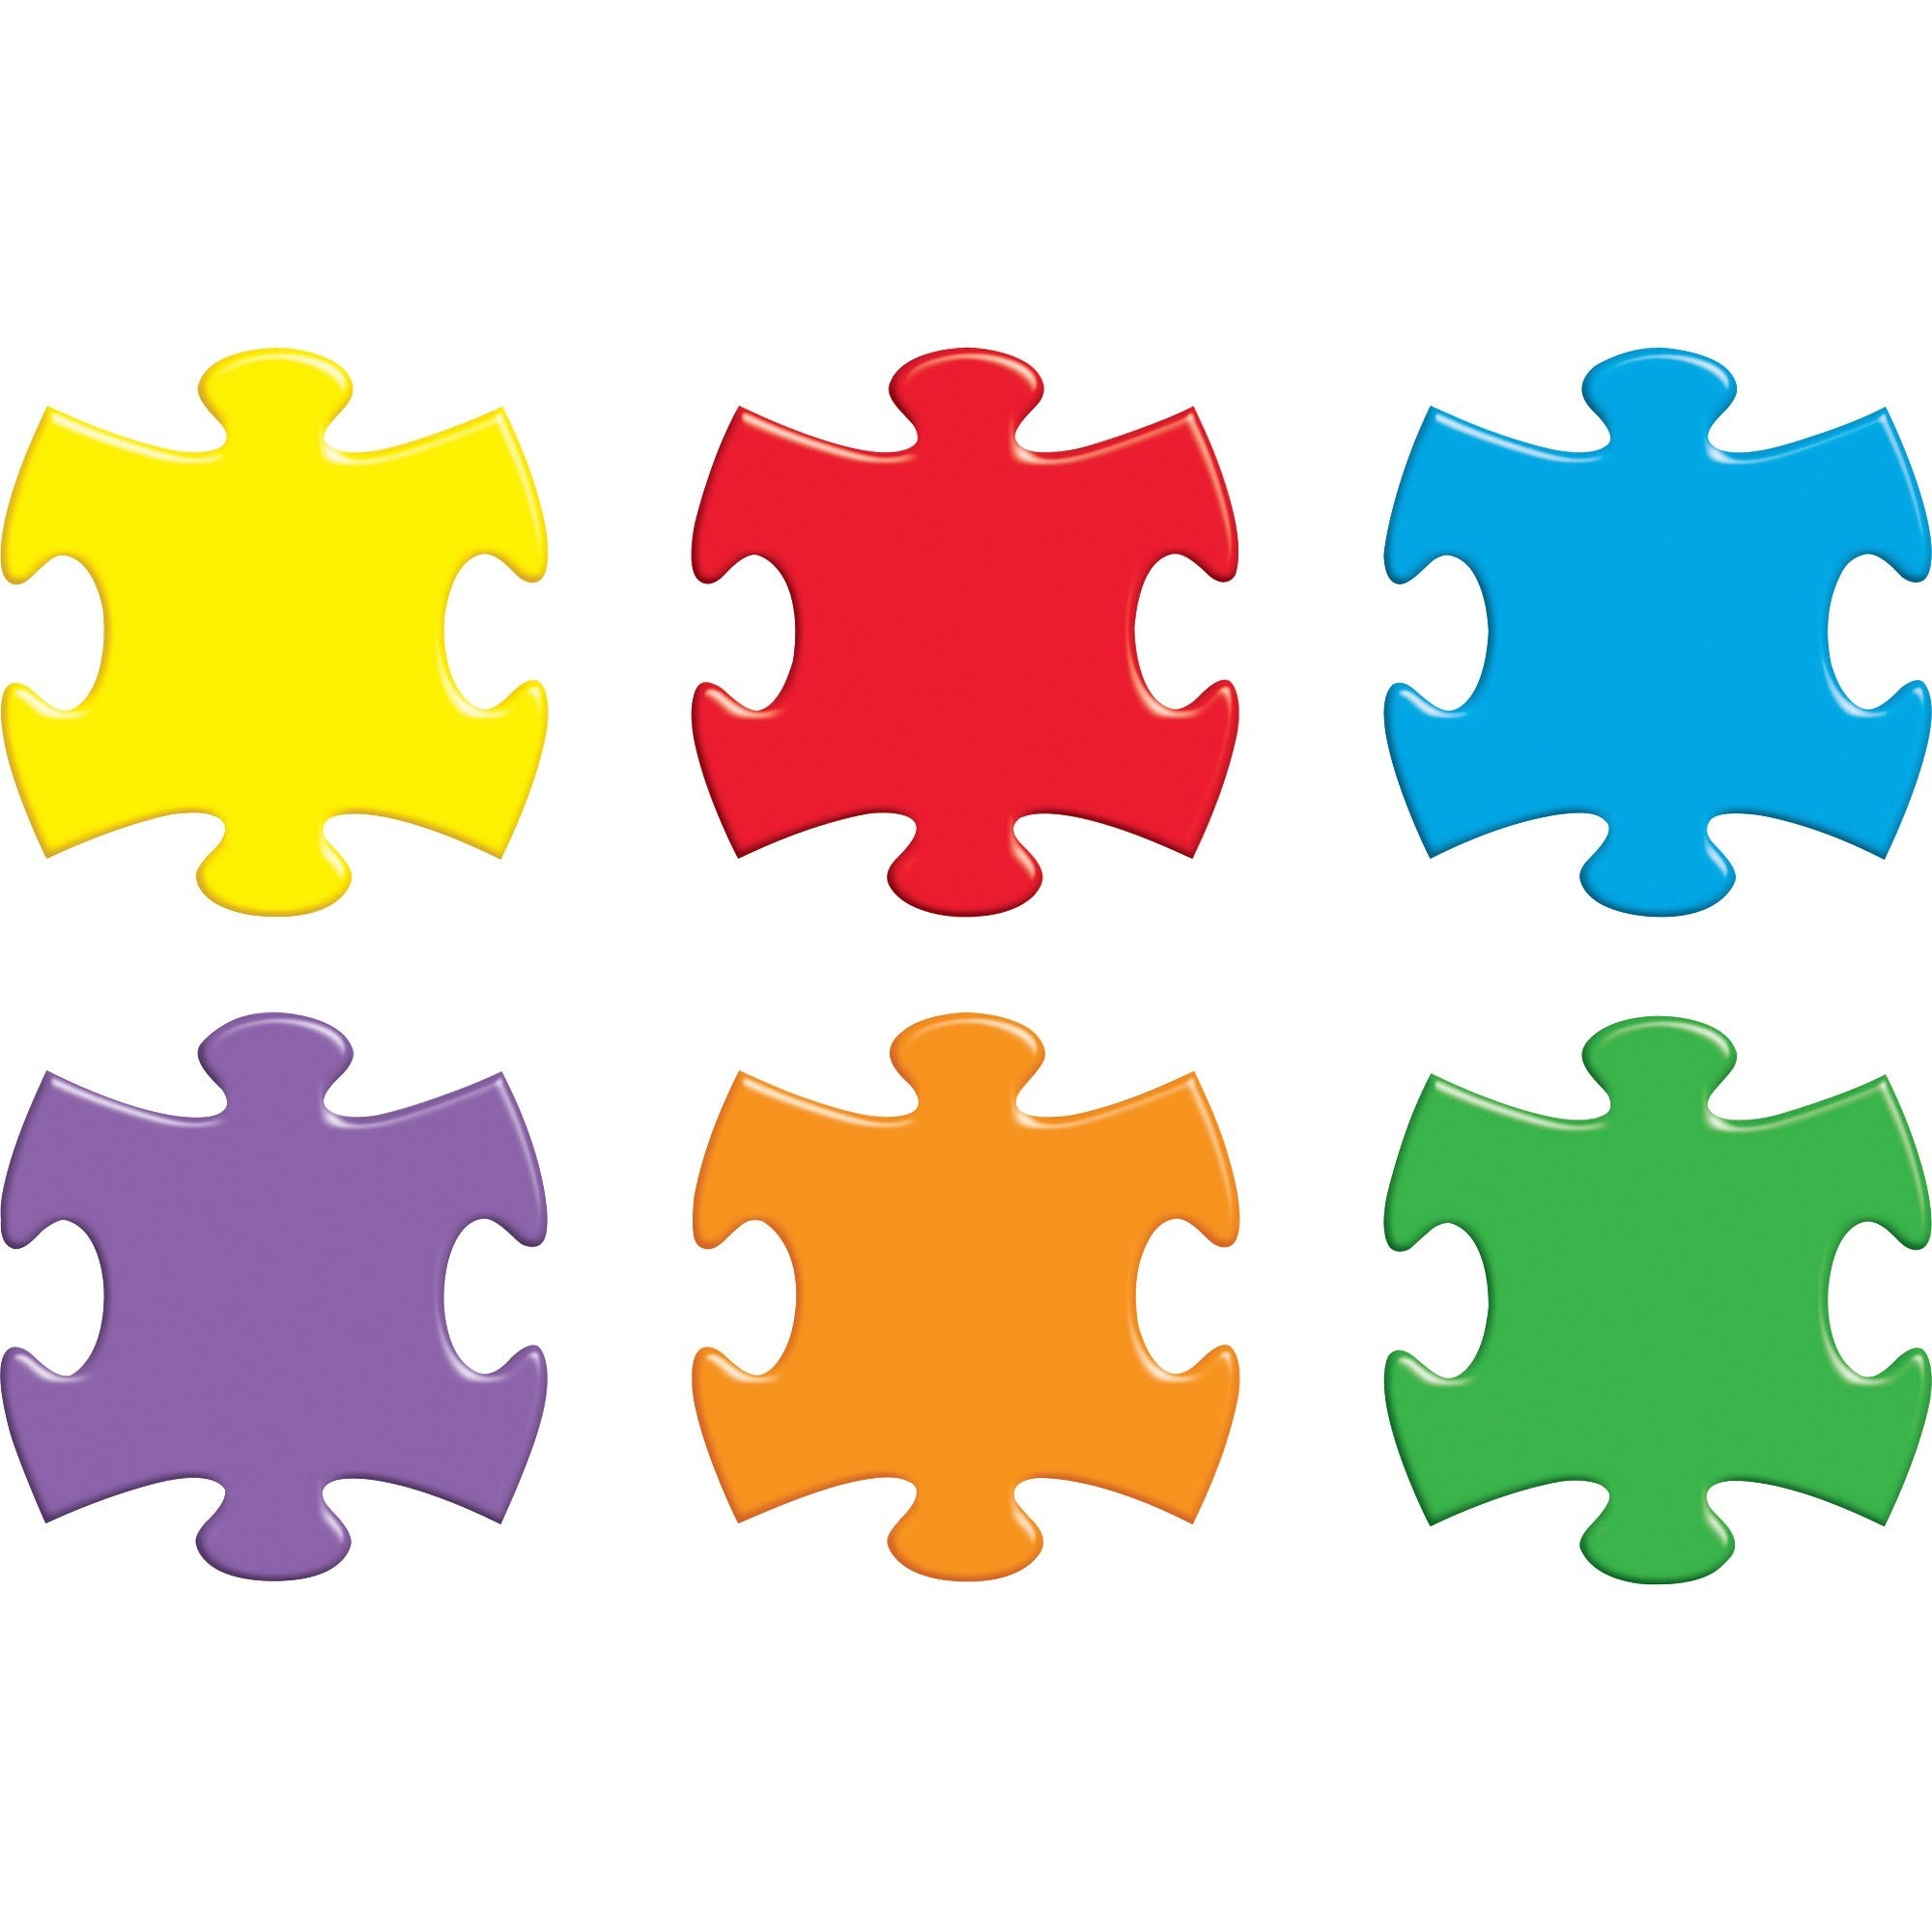 trend-accents-interlocking-puzzle-550-theme-subject-learning-6-10-year36-piece_tept10906 - 1